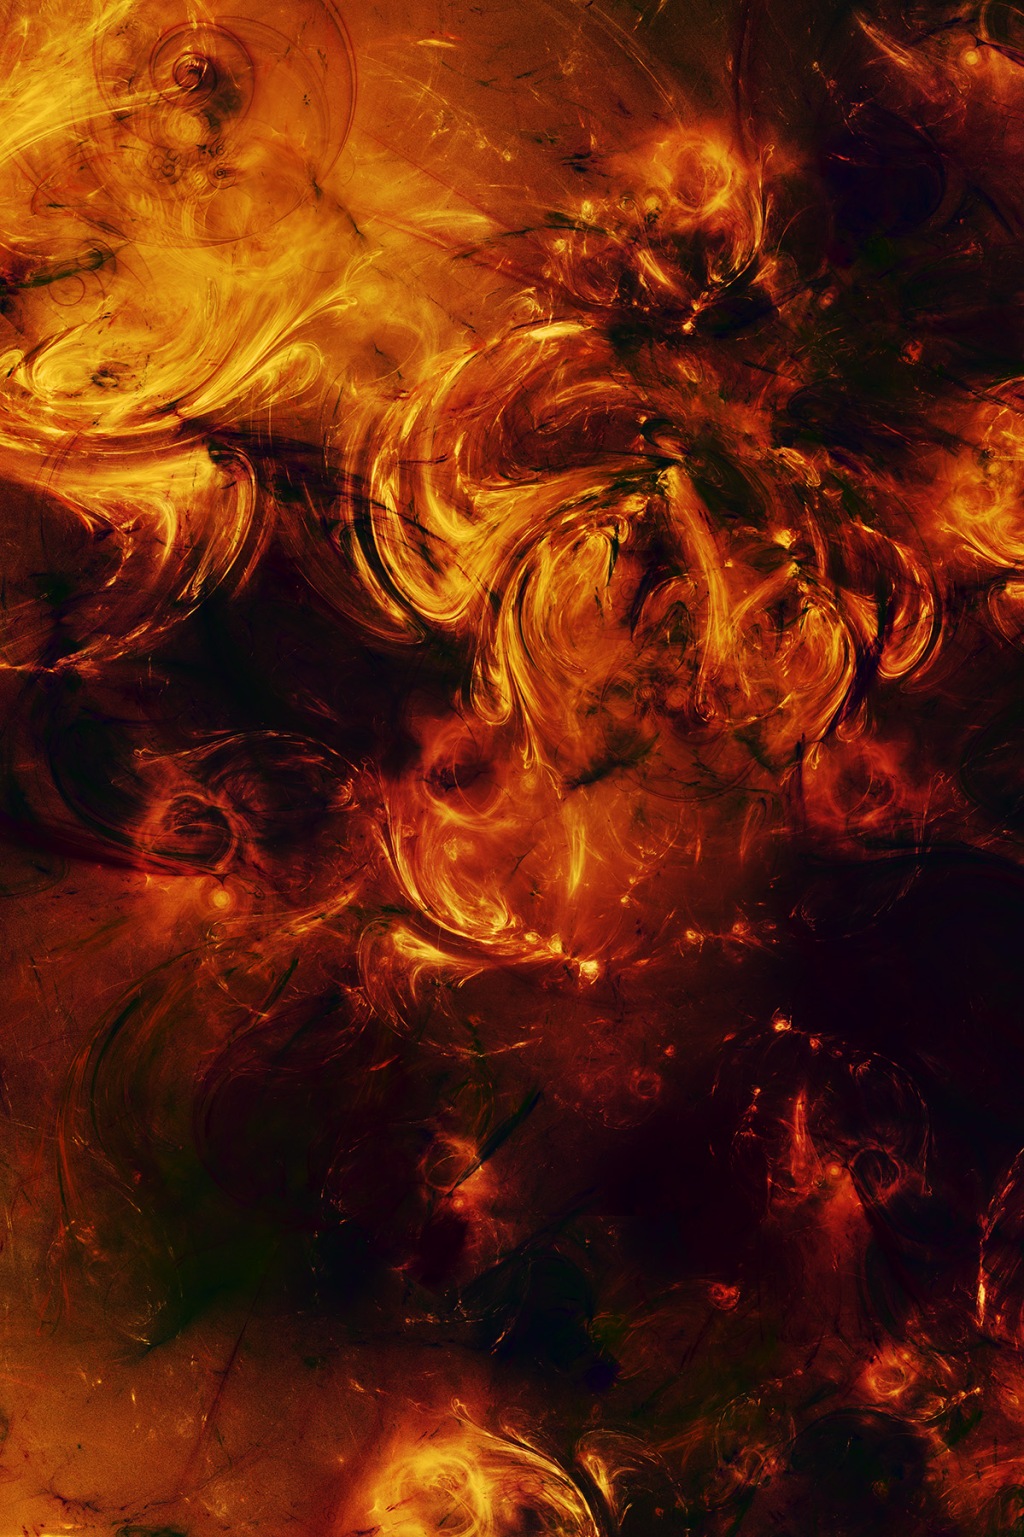 Molten Fire Burst Flames And More! Abstract Artwork